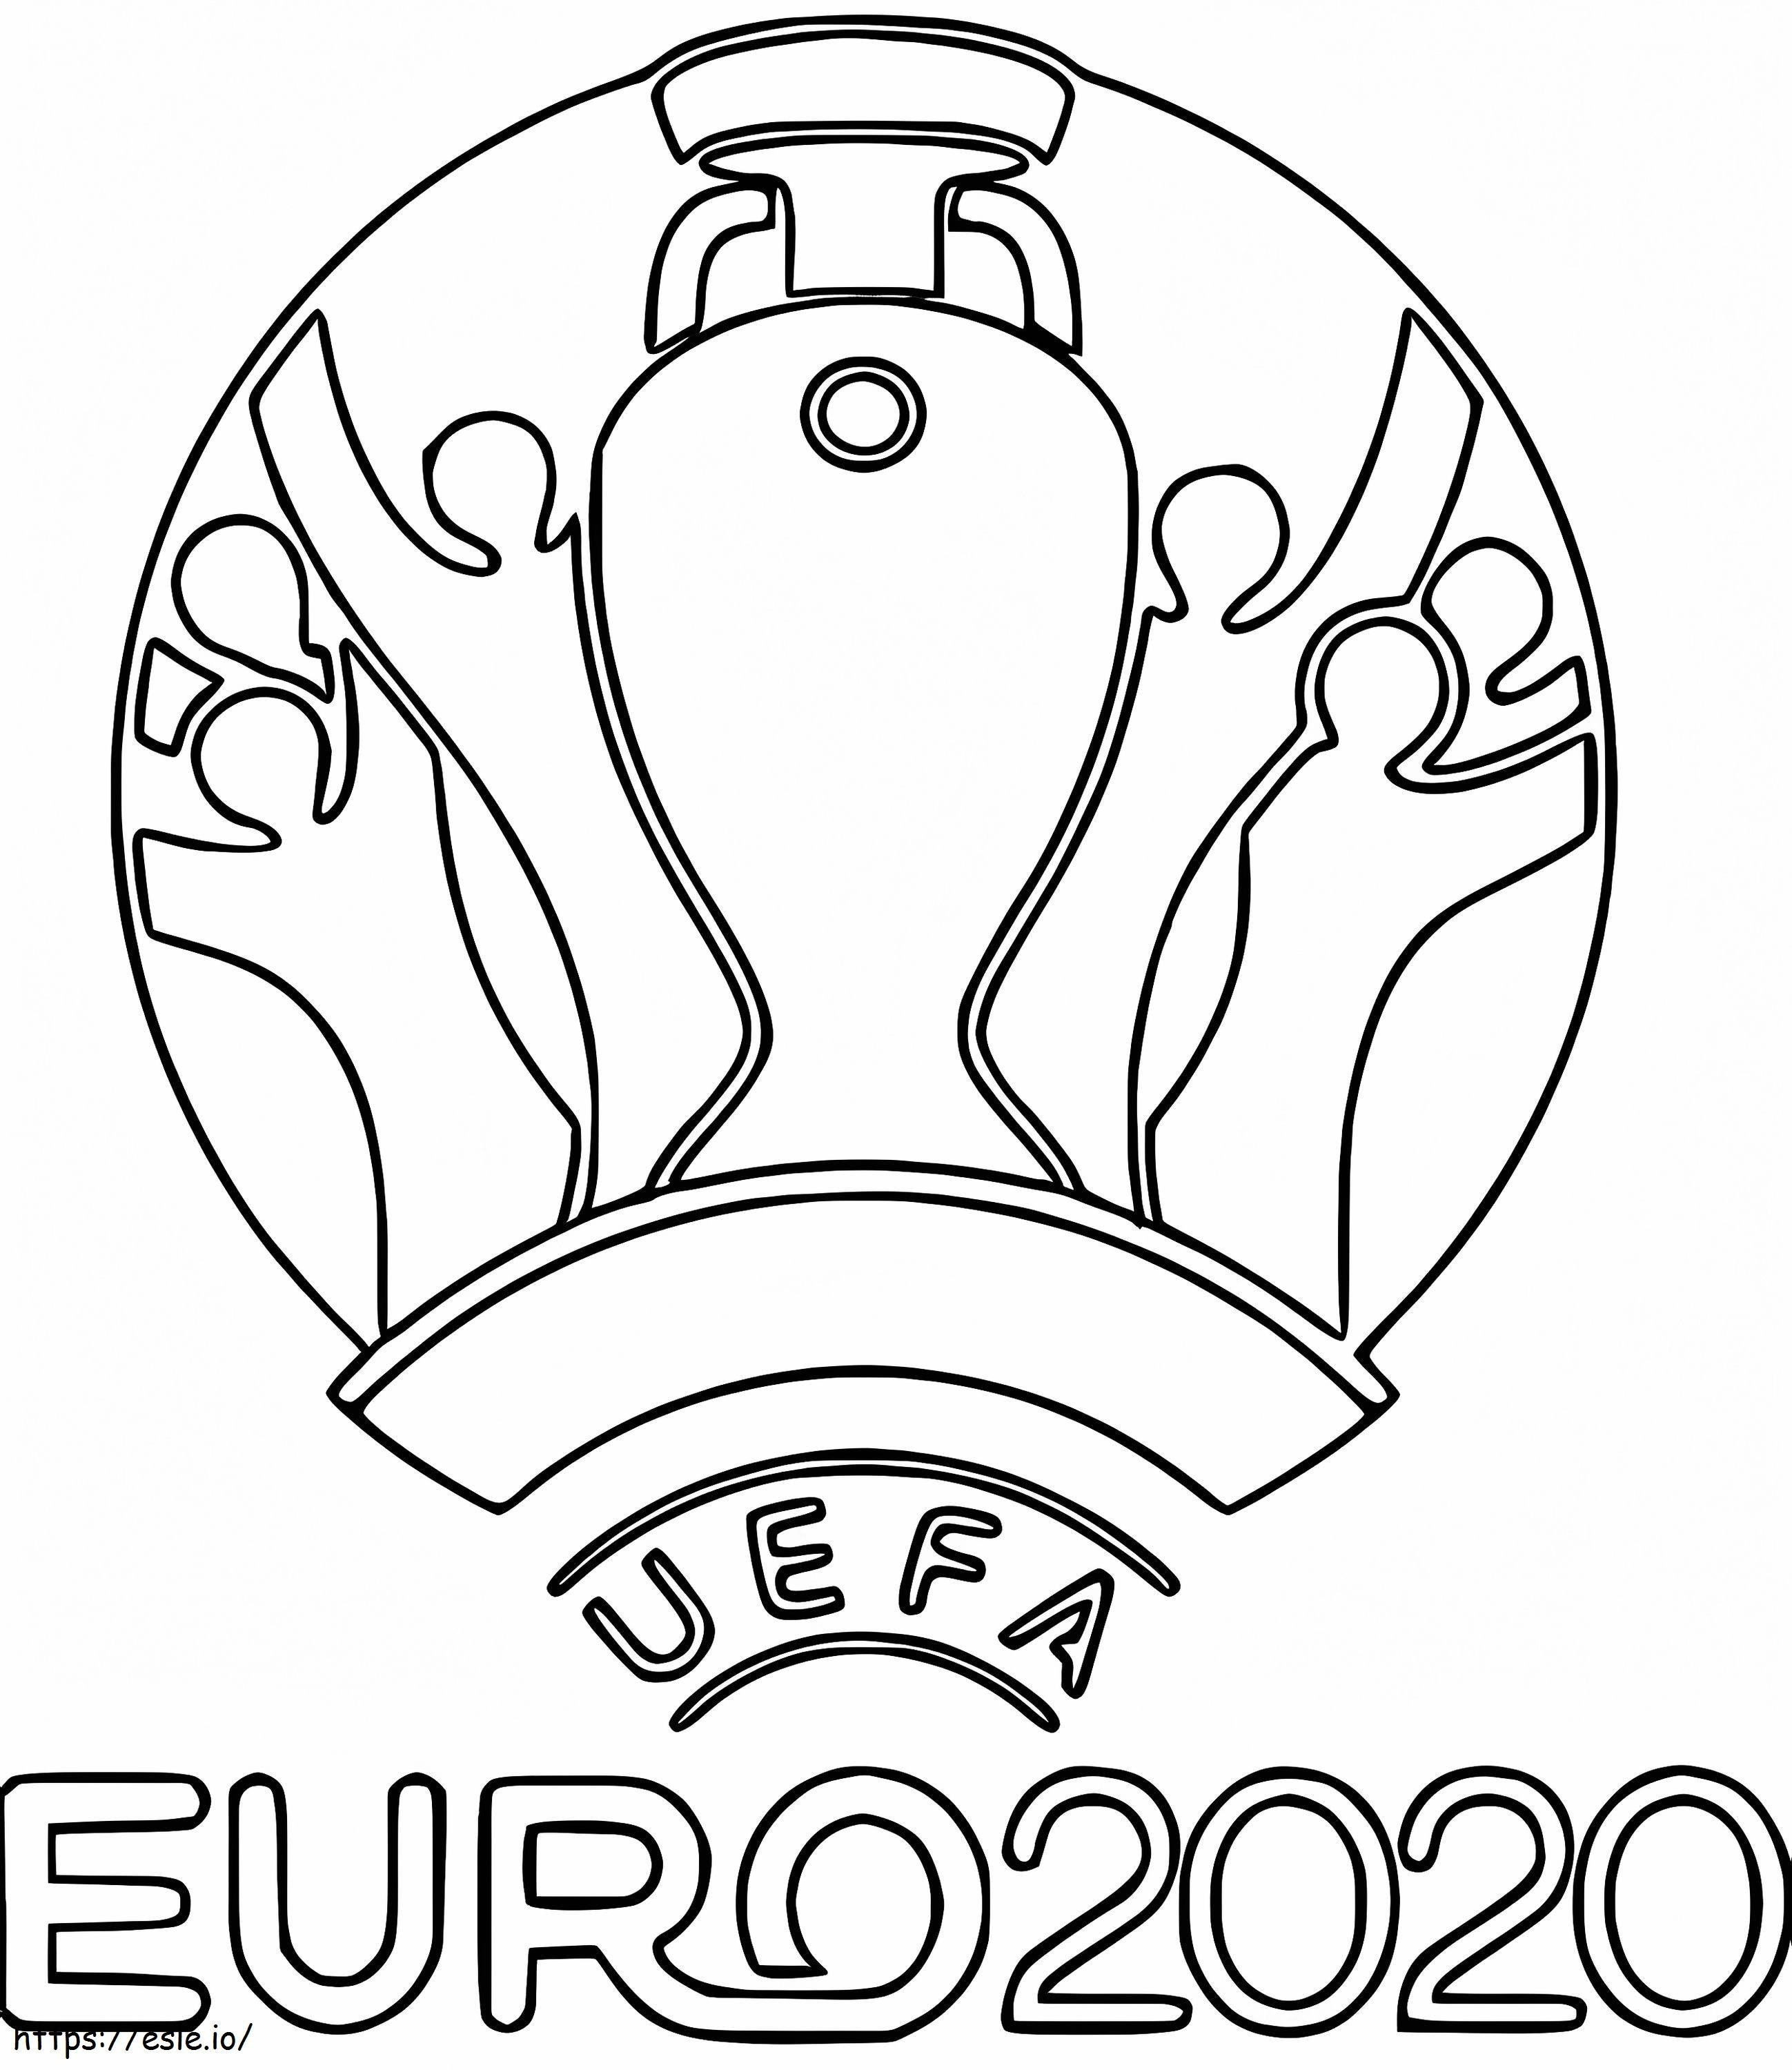 Euro 2020 2021 coloring page